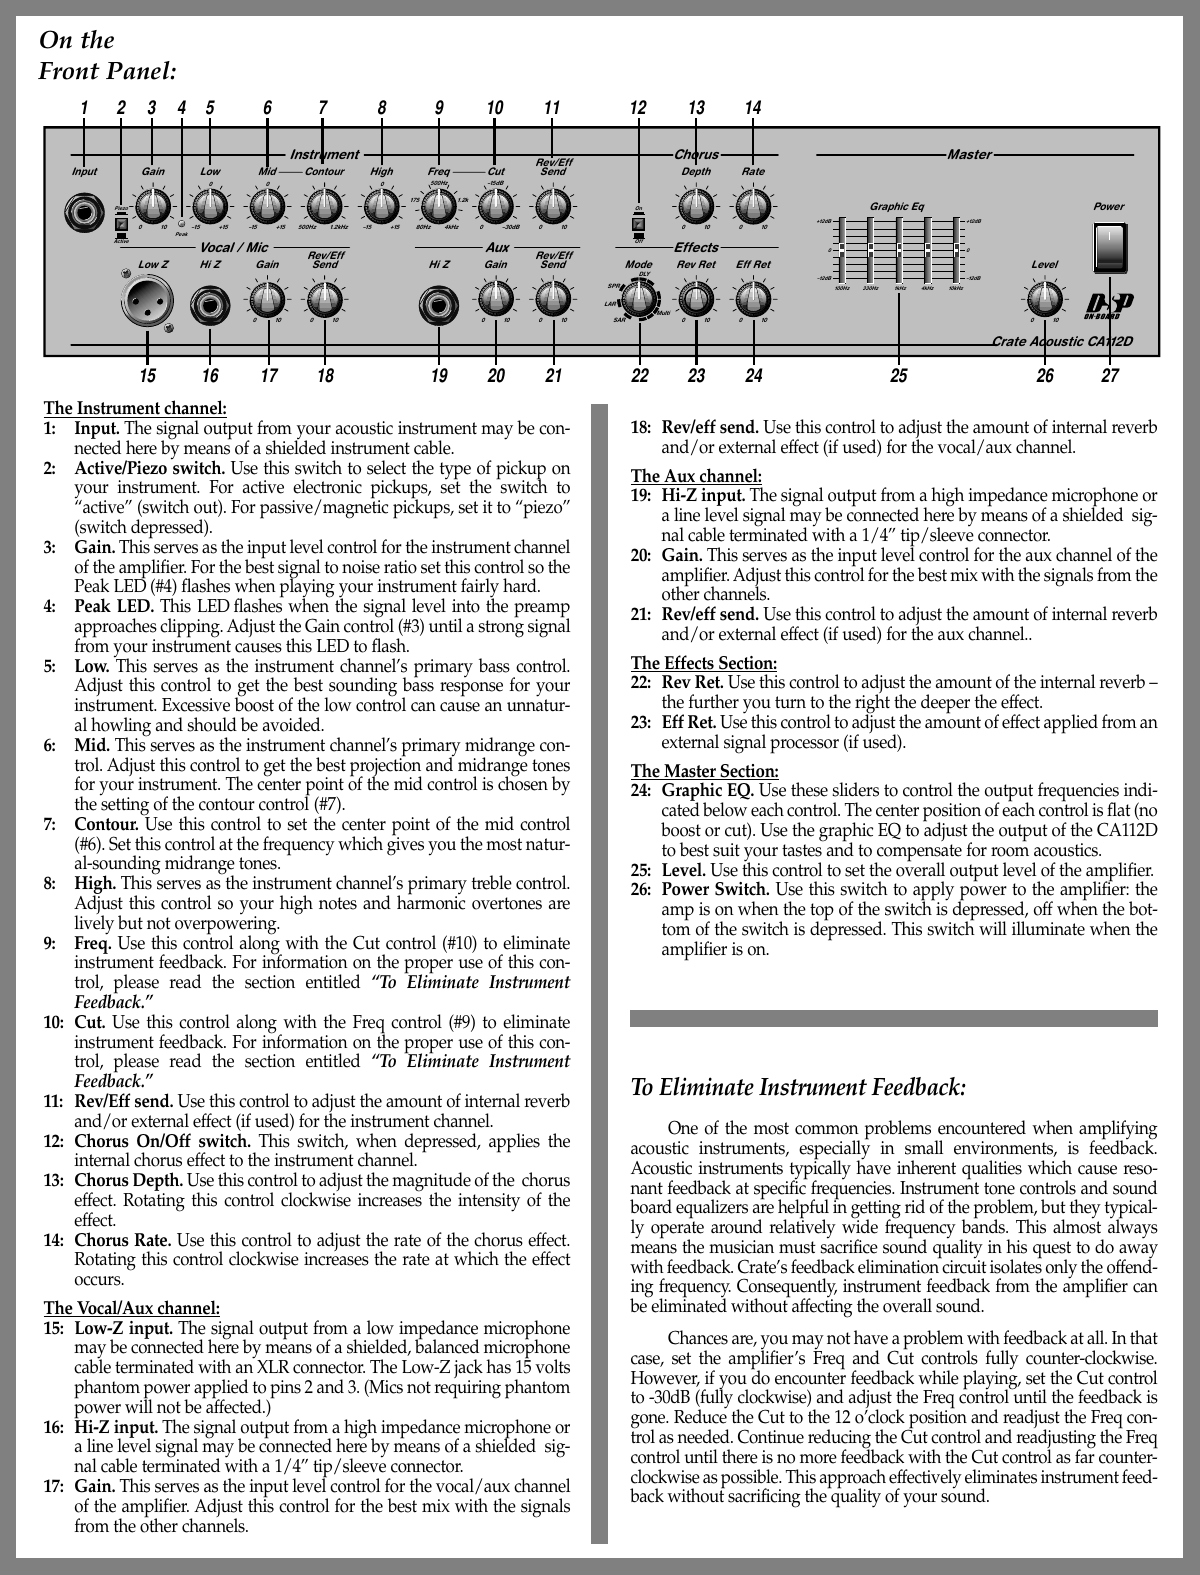 Page 4 of 6 - Crate-Amplifiers Crate-Amplifiers-Ca112D-Users-Manual-  Crate-amplifiers-ca112d-users-manual